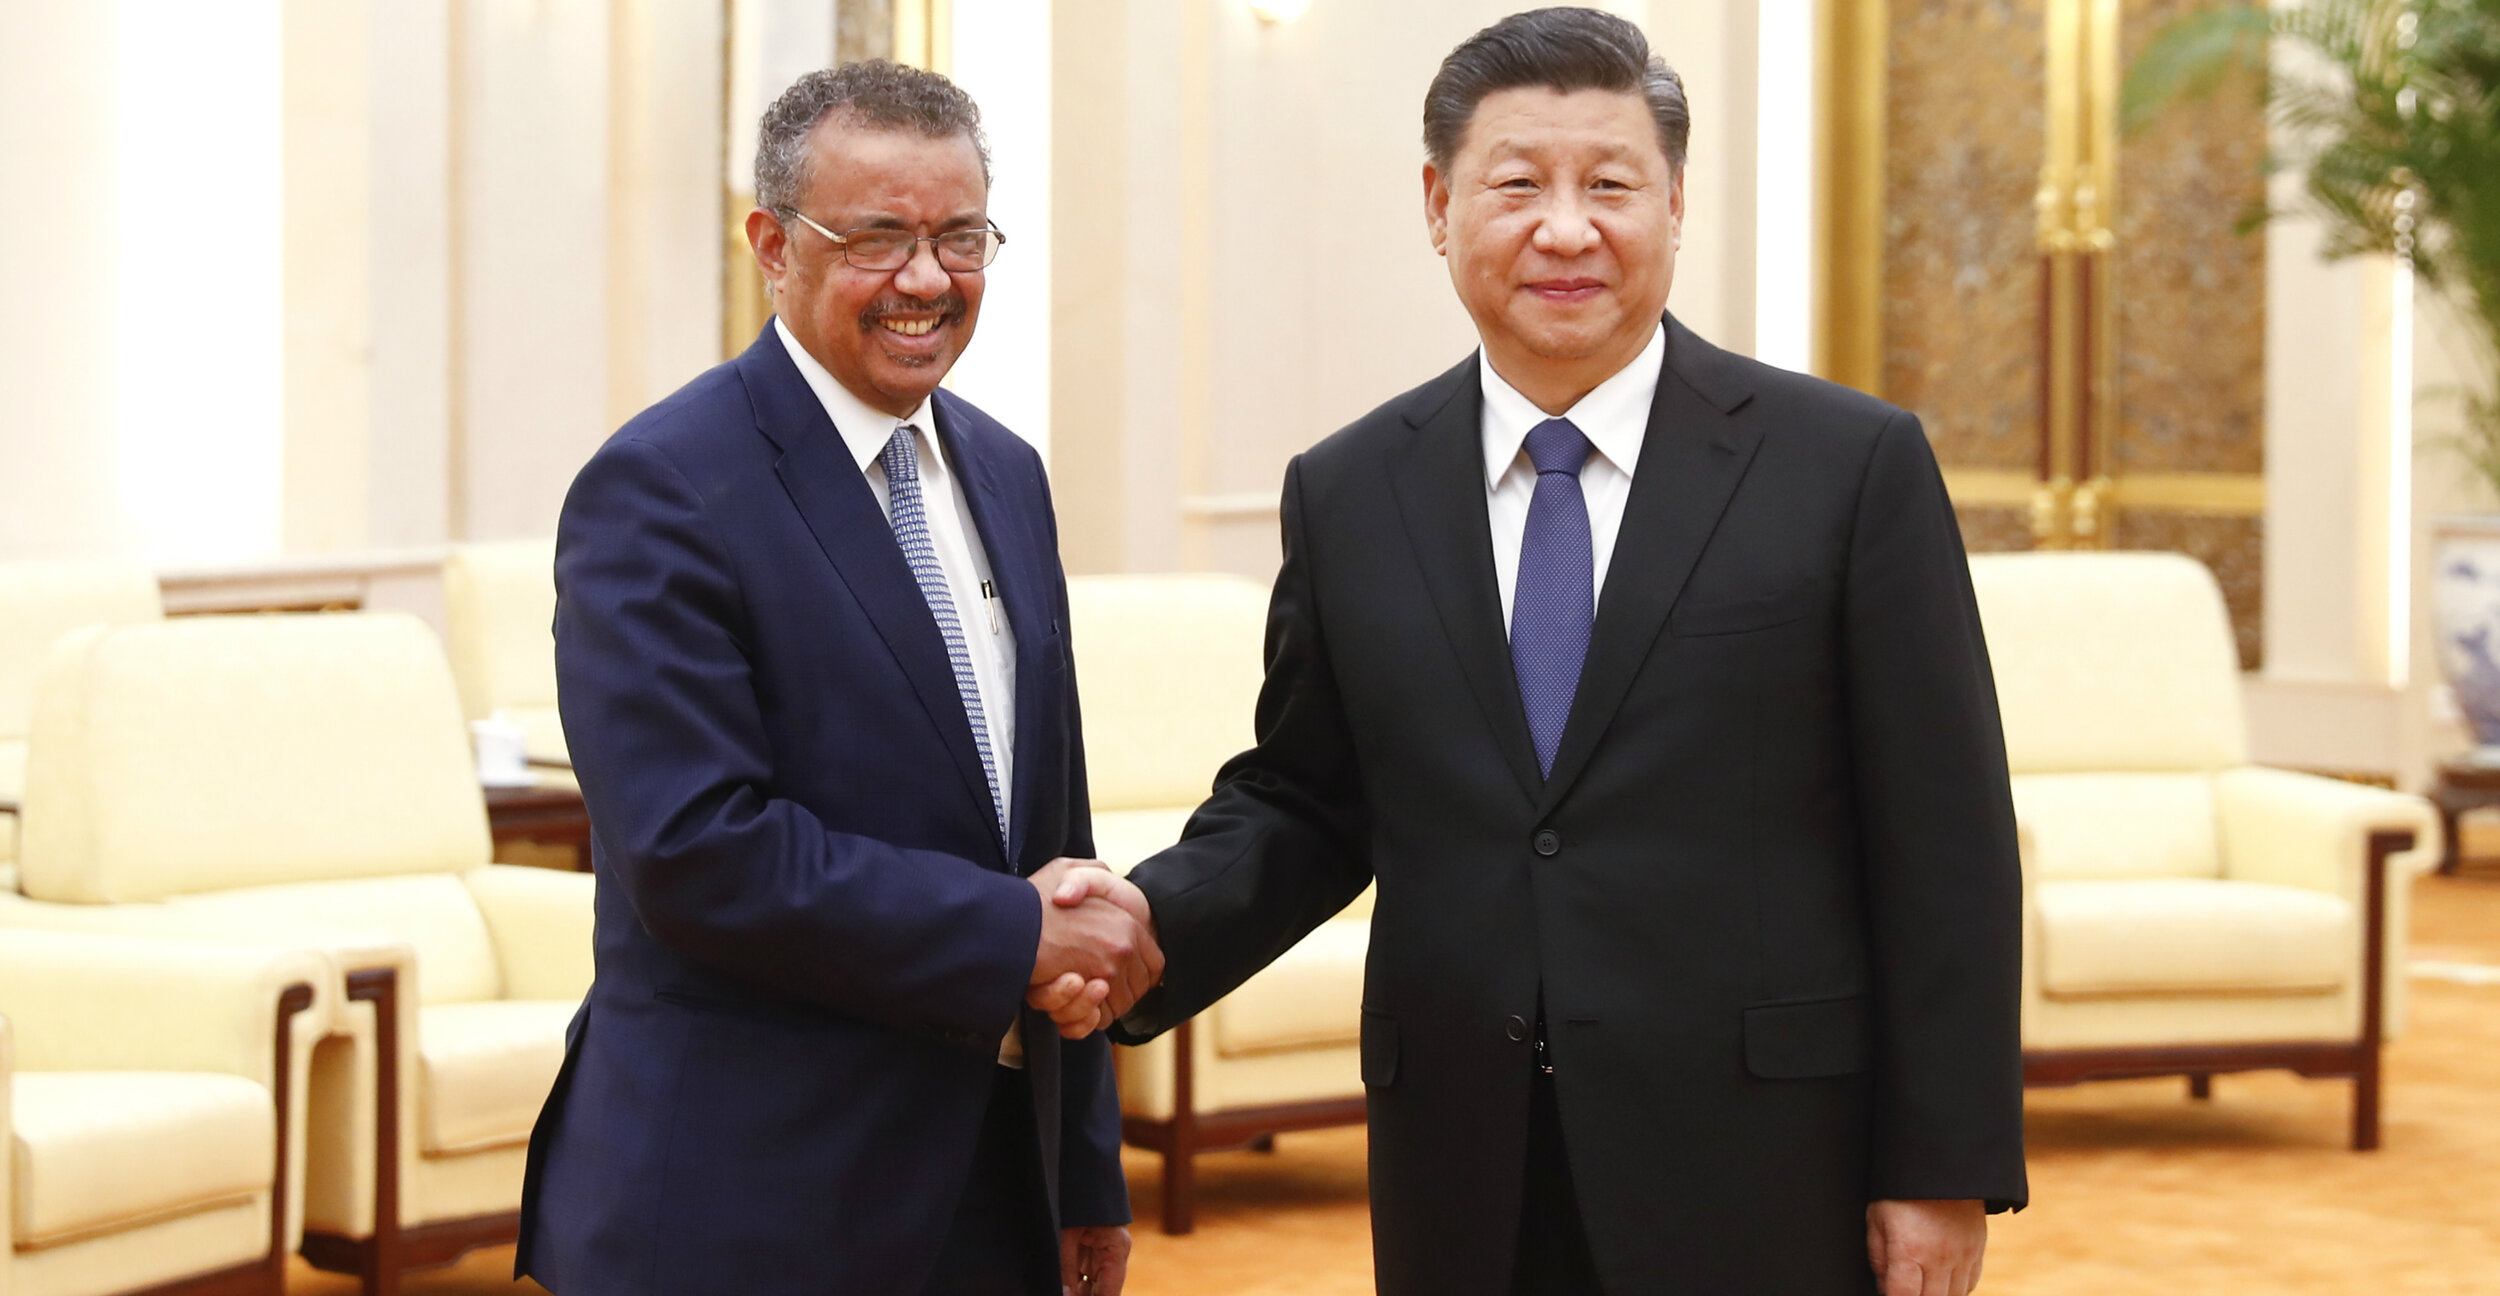 Director-General of the WHO Tedros Adhanom, and People’s Republic of China President Xi Jinping.